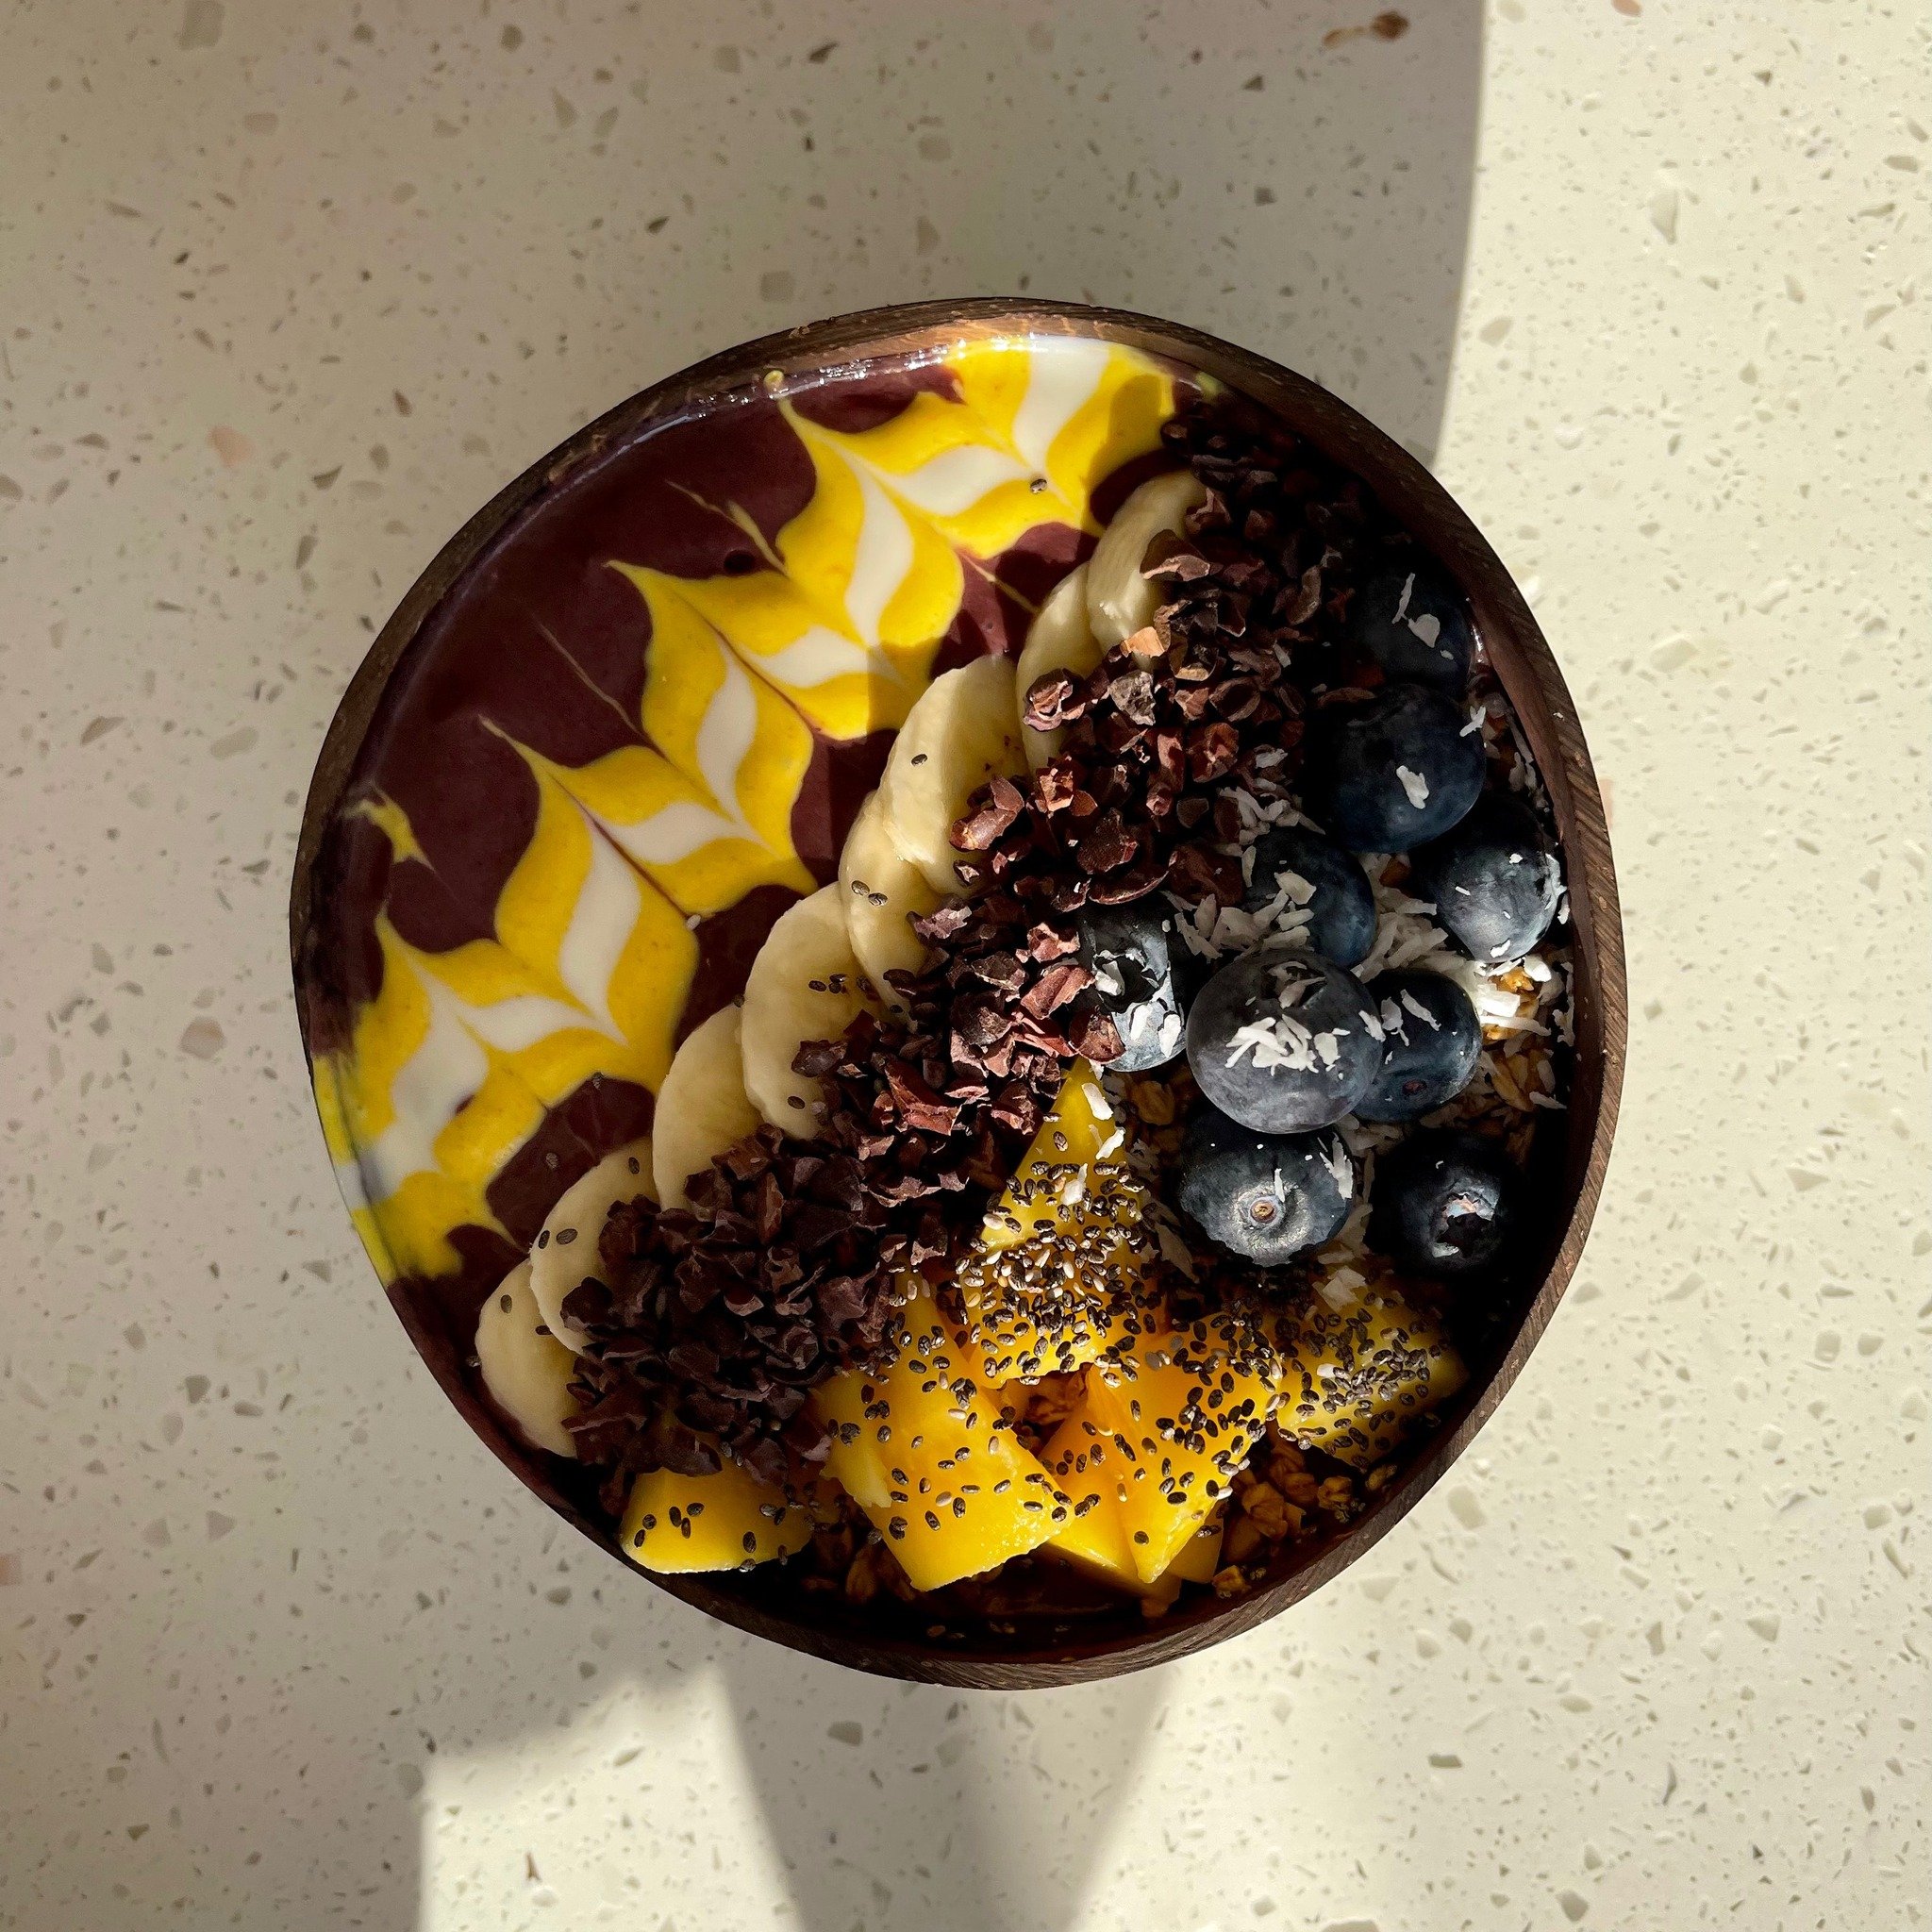 🥭 Discover the amazing benefits of Mango in our Mango Melody Bowl!  Here are a few:

1️⃣ Rich in vitamins and antioxidants
2️⃣ Boosts immune system
3️⃣ Supports eye health
4️⃣ Promotes digestion
5️⃣ May aid in weight loss

Enjoy the delicious taste 